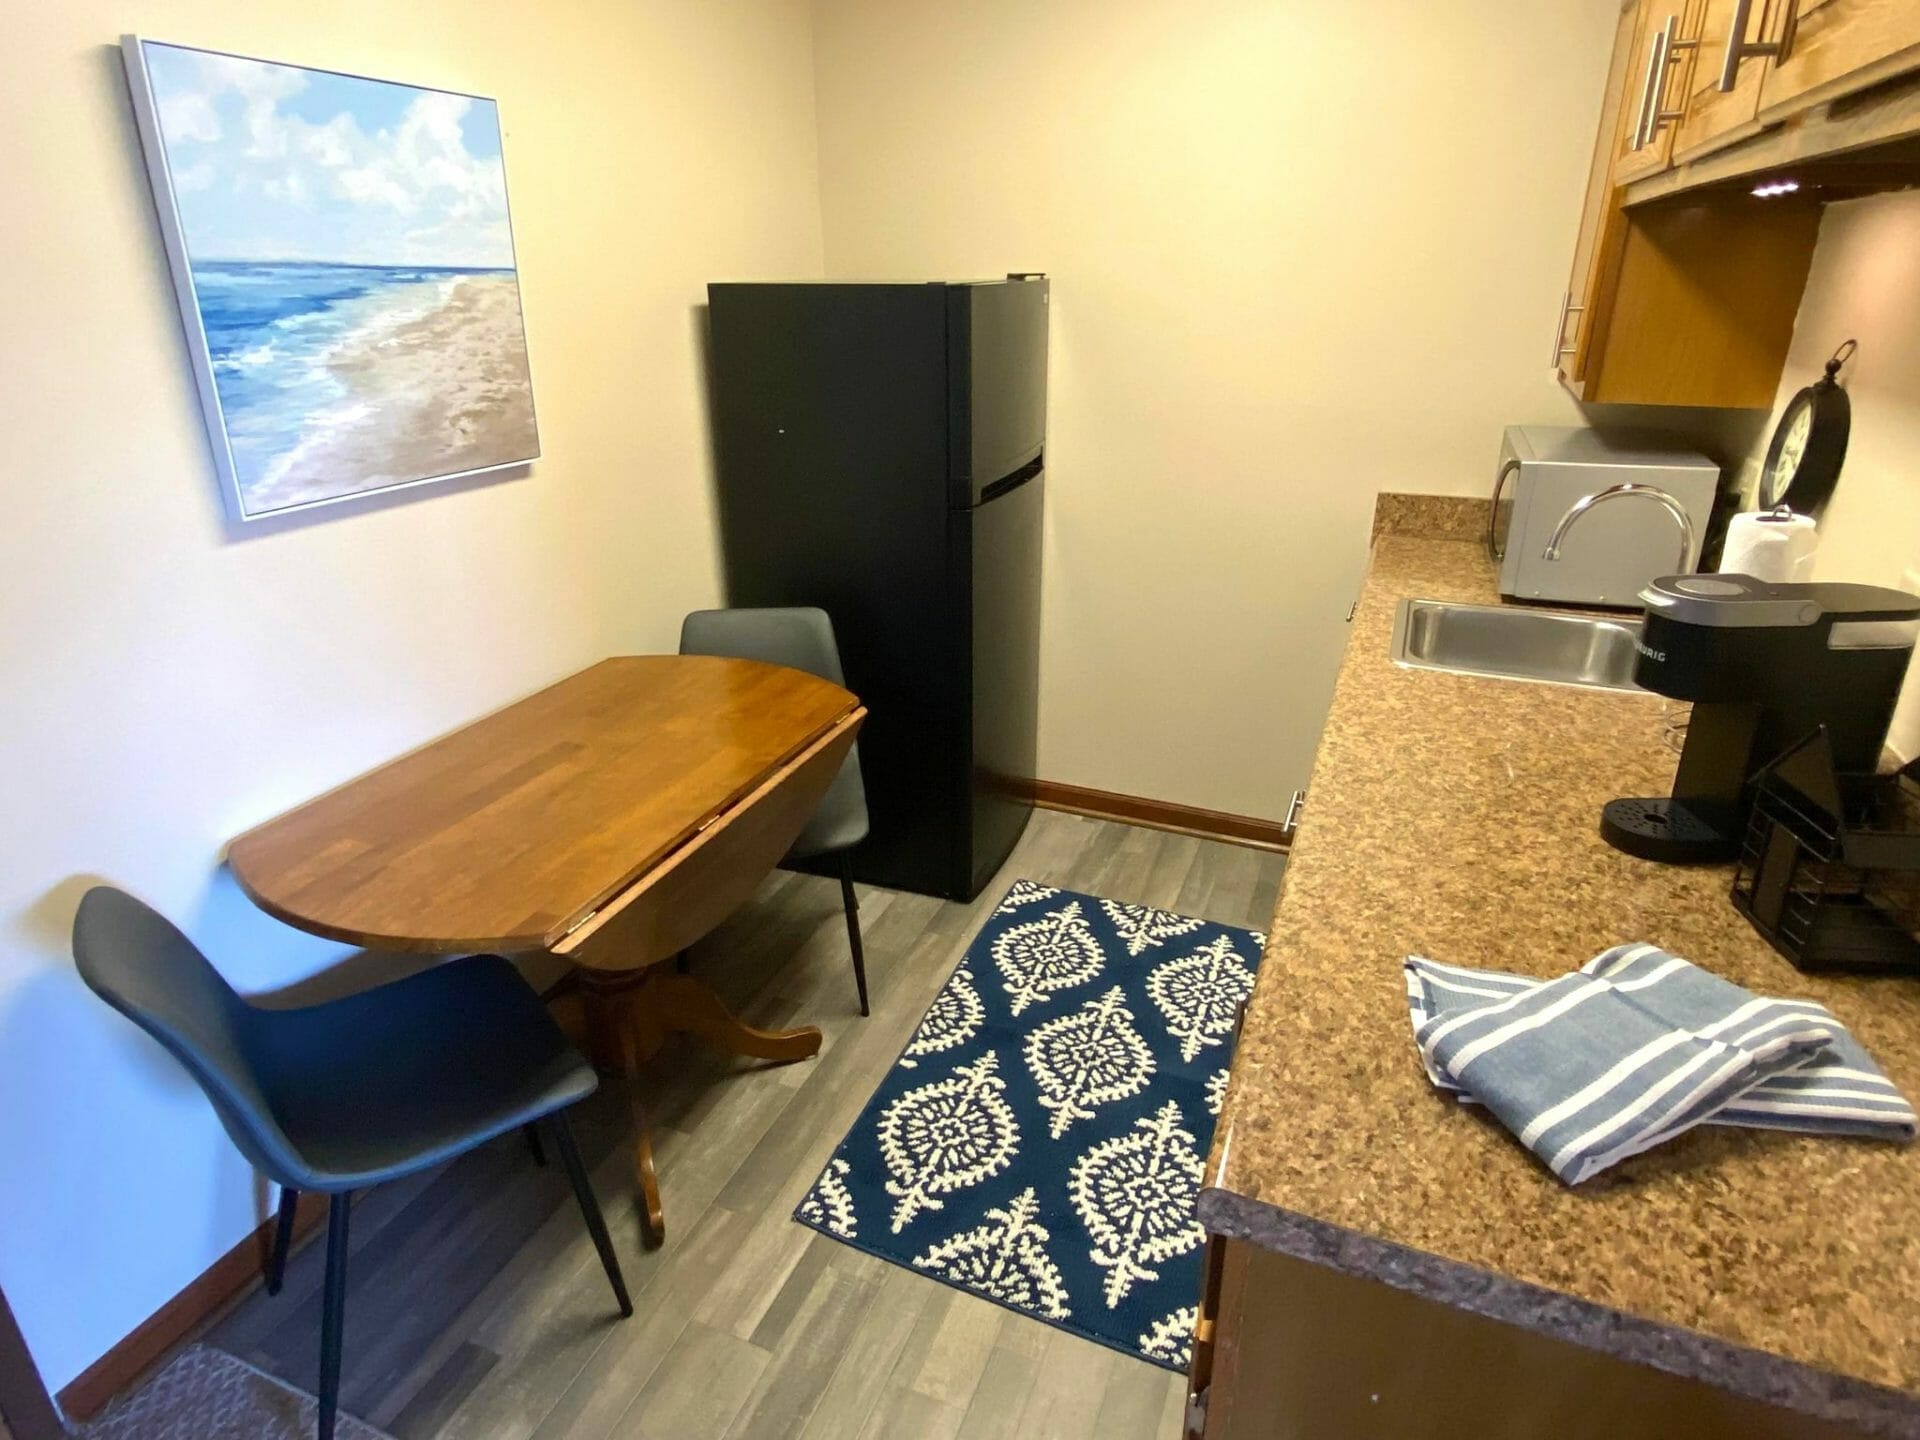 <span  class="uc_style_uc_tiles_grid_image_elementor_uc_items_attribute_title" style="color:#000000;">An apartment kitchenette at American Village. </span>